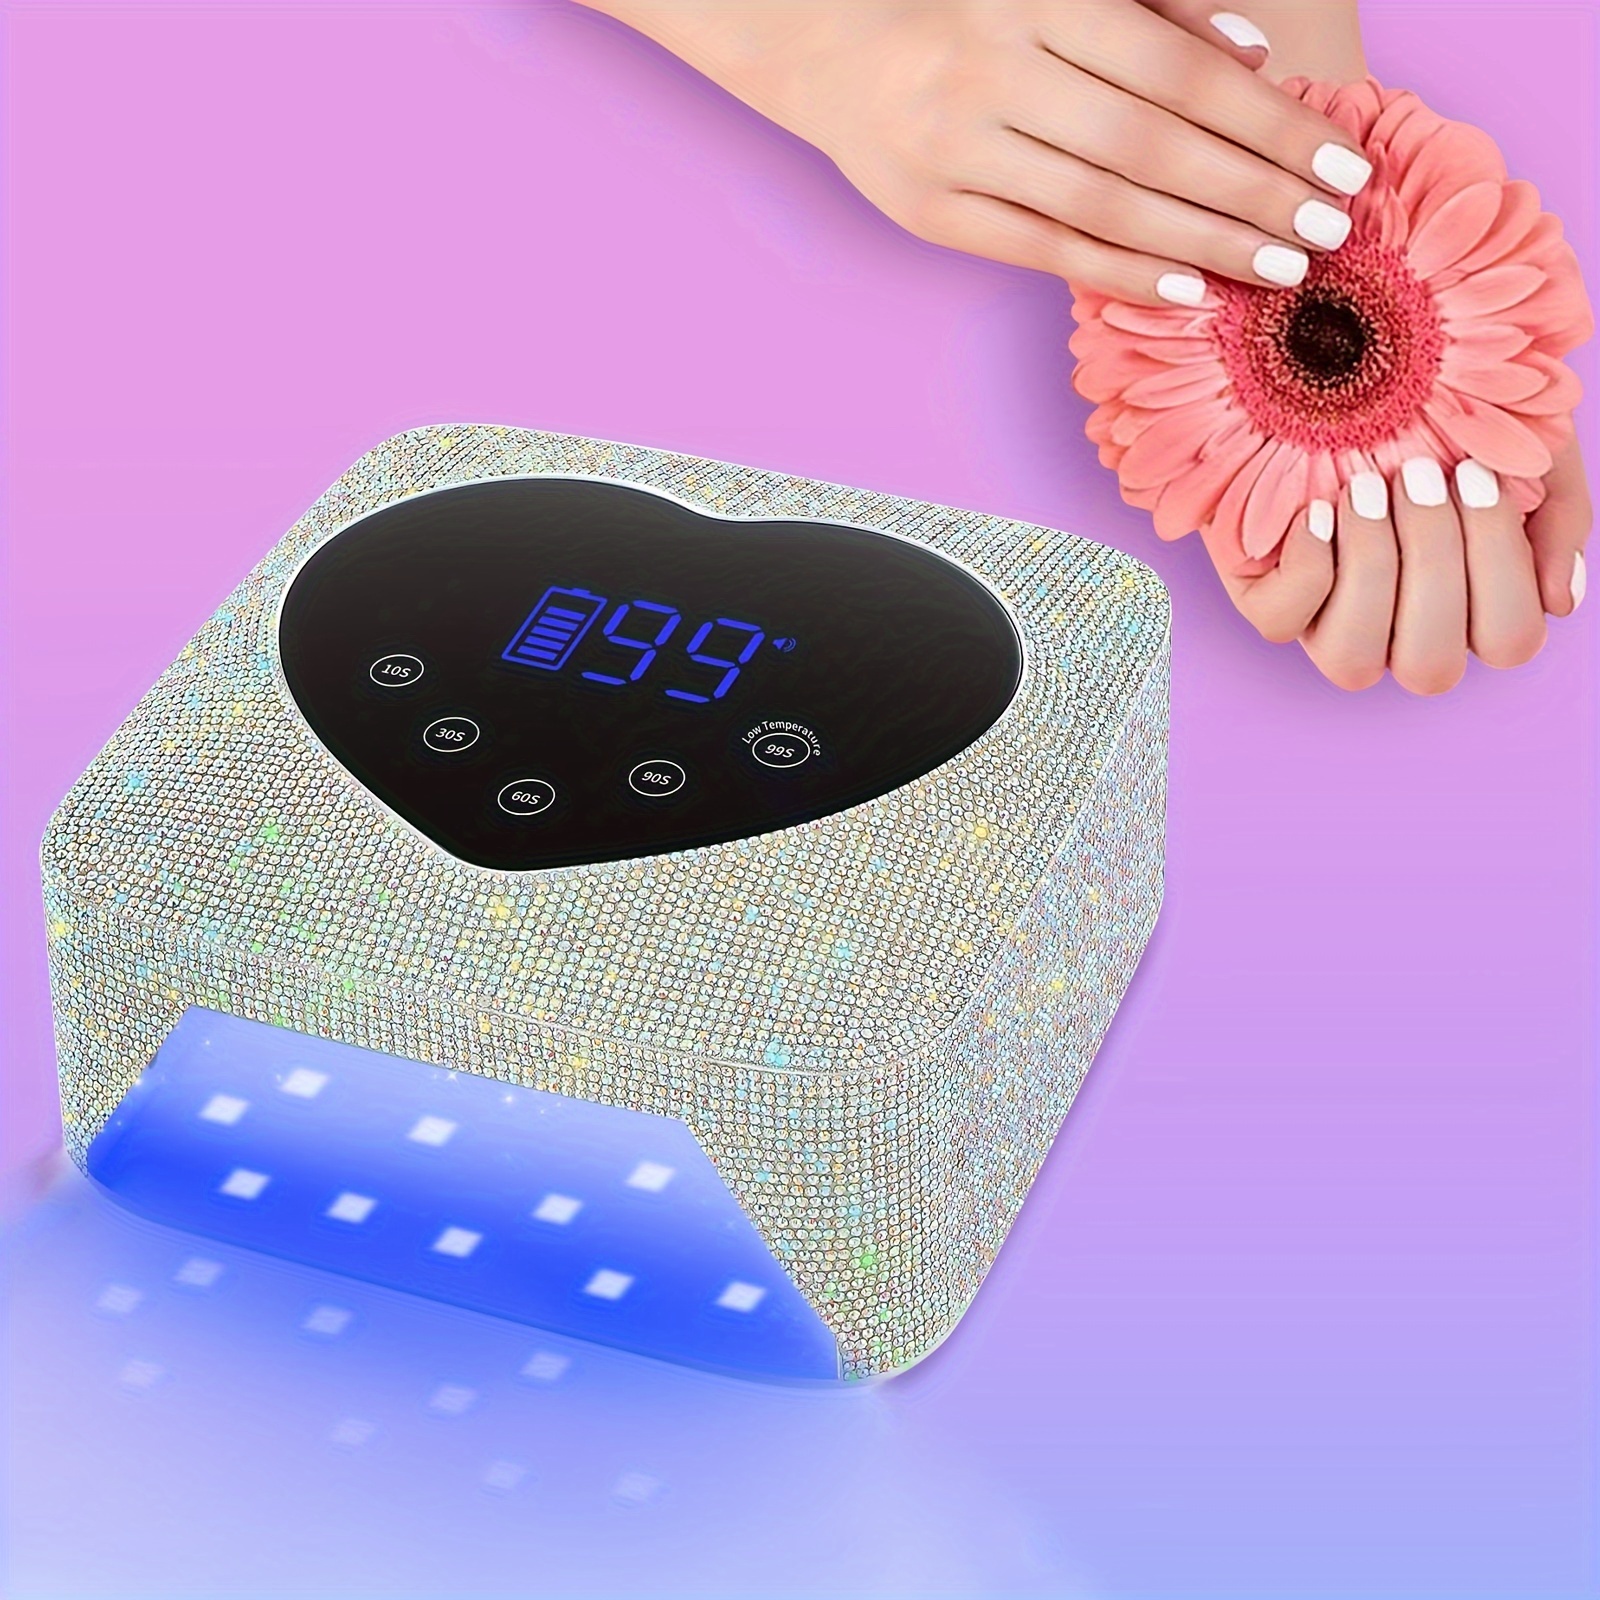 

Cordless Uv Nail Lamp 72w, Rechargeable Diamond Led Nail Dryer, Fast Curing Salon & Nails, 5 Timer Settings, Touch Control & Auto Sensor, Silver